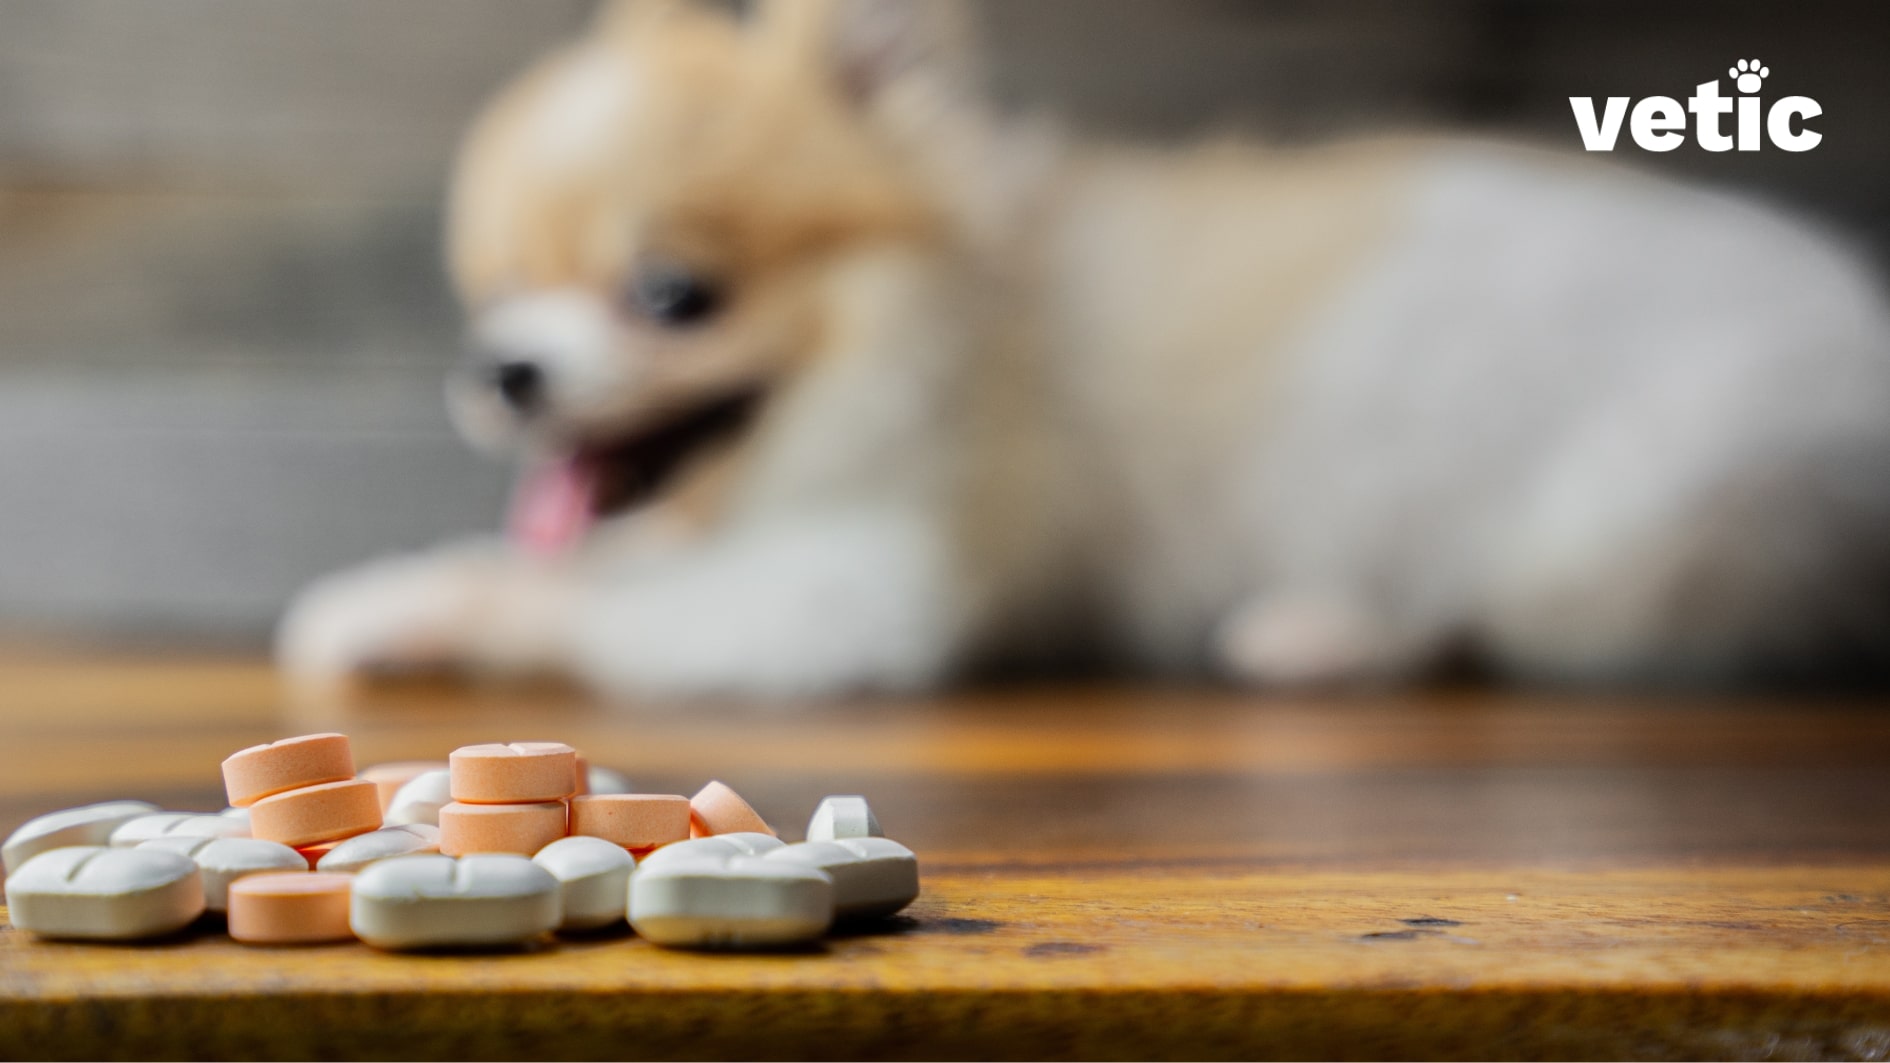 Lots of large white and orange pills with scoring in the forefront, with a Pomeranian sitting in the background. Deworming is the only treatment and cure for roundworms in dogs